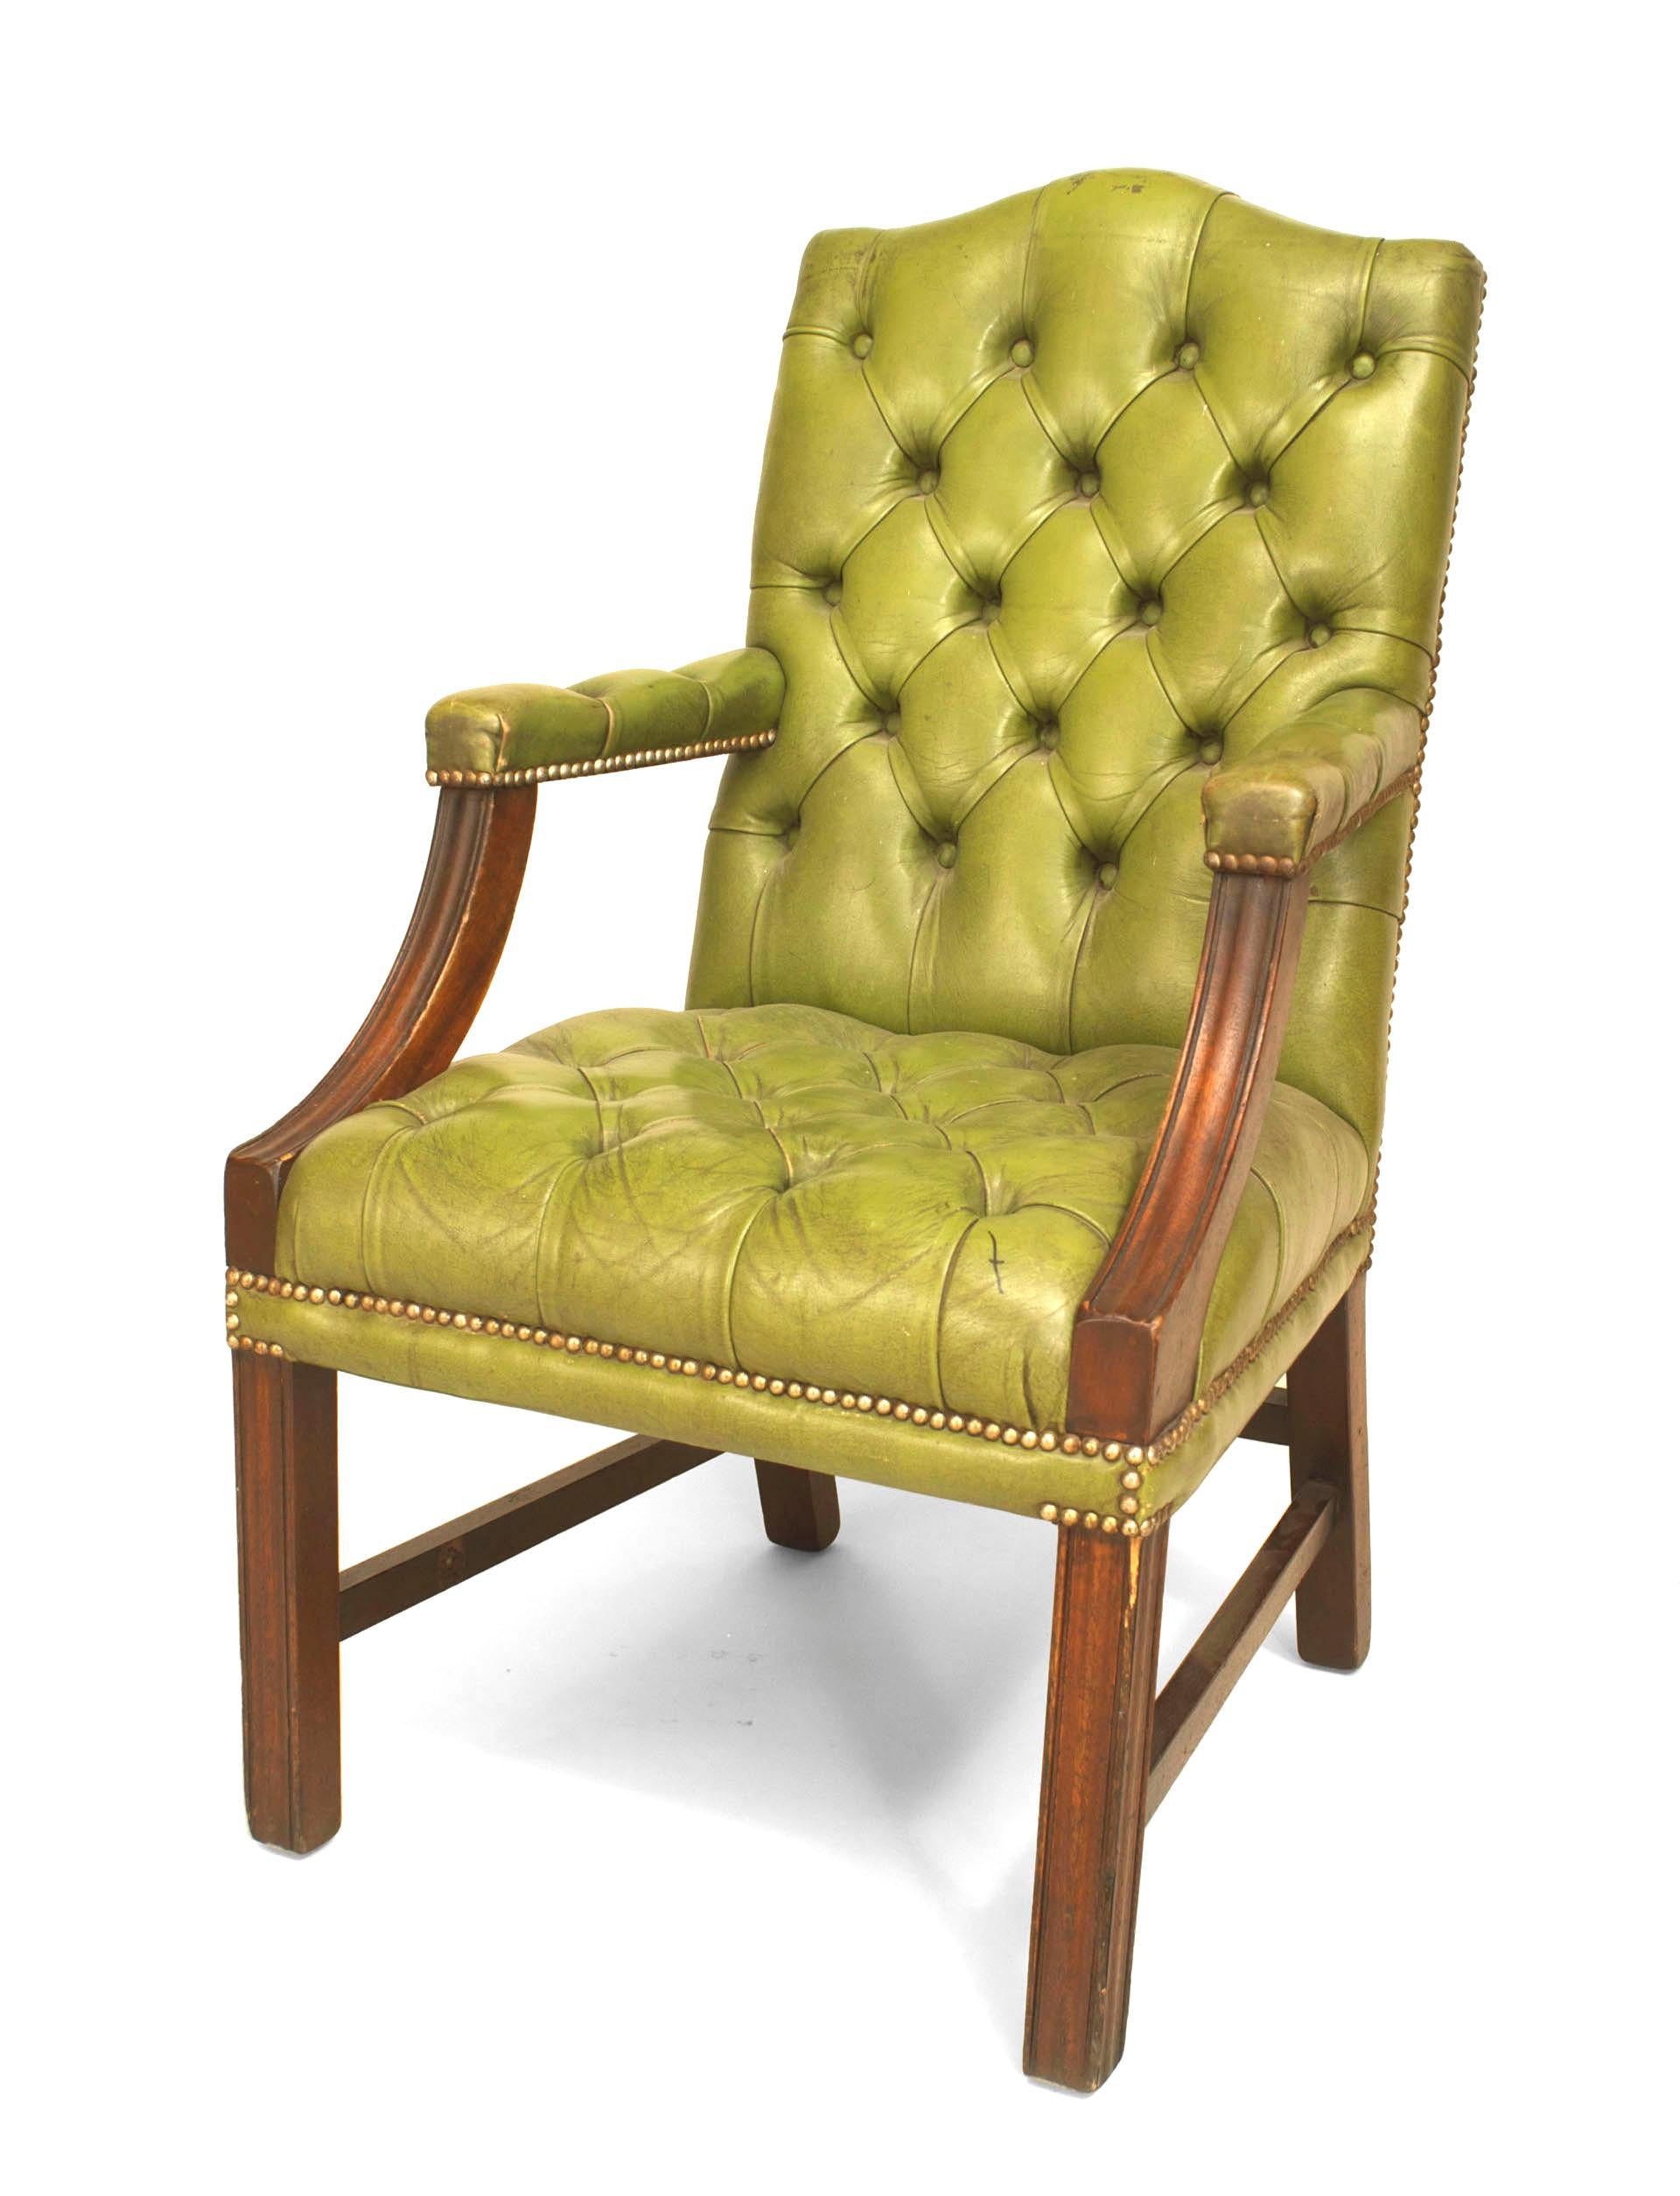 British Set of 6 English Georgian Green Tufted Chairs For Sale